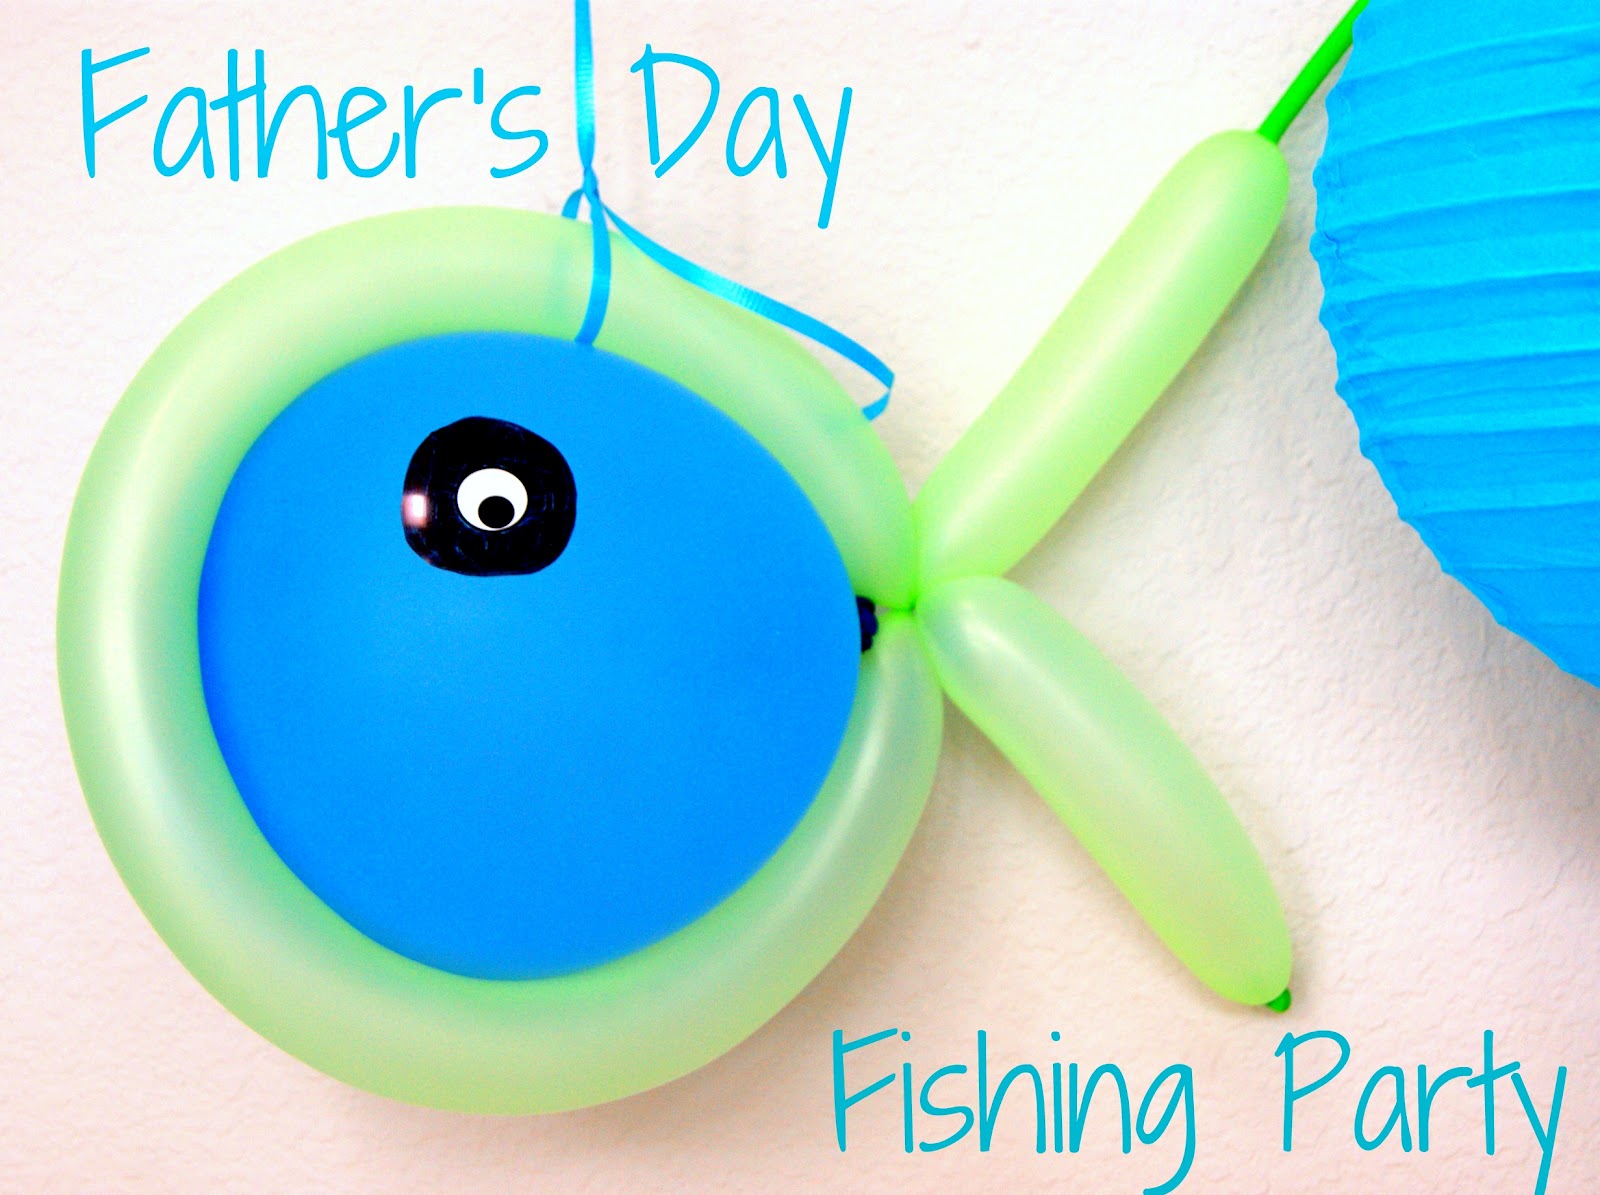 michelle paige blogs: Father's Day Fishing Party